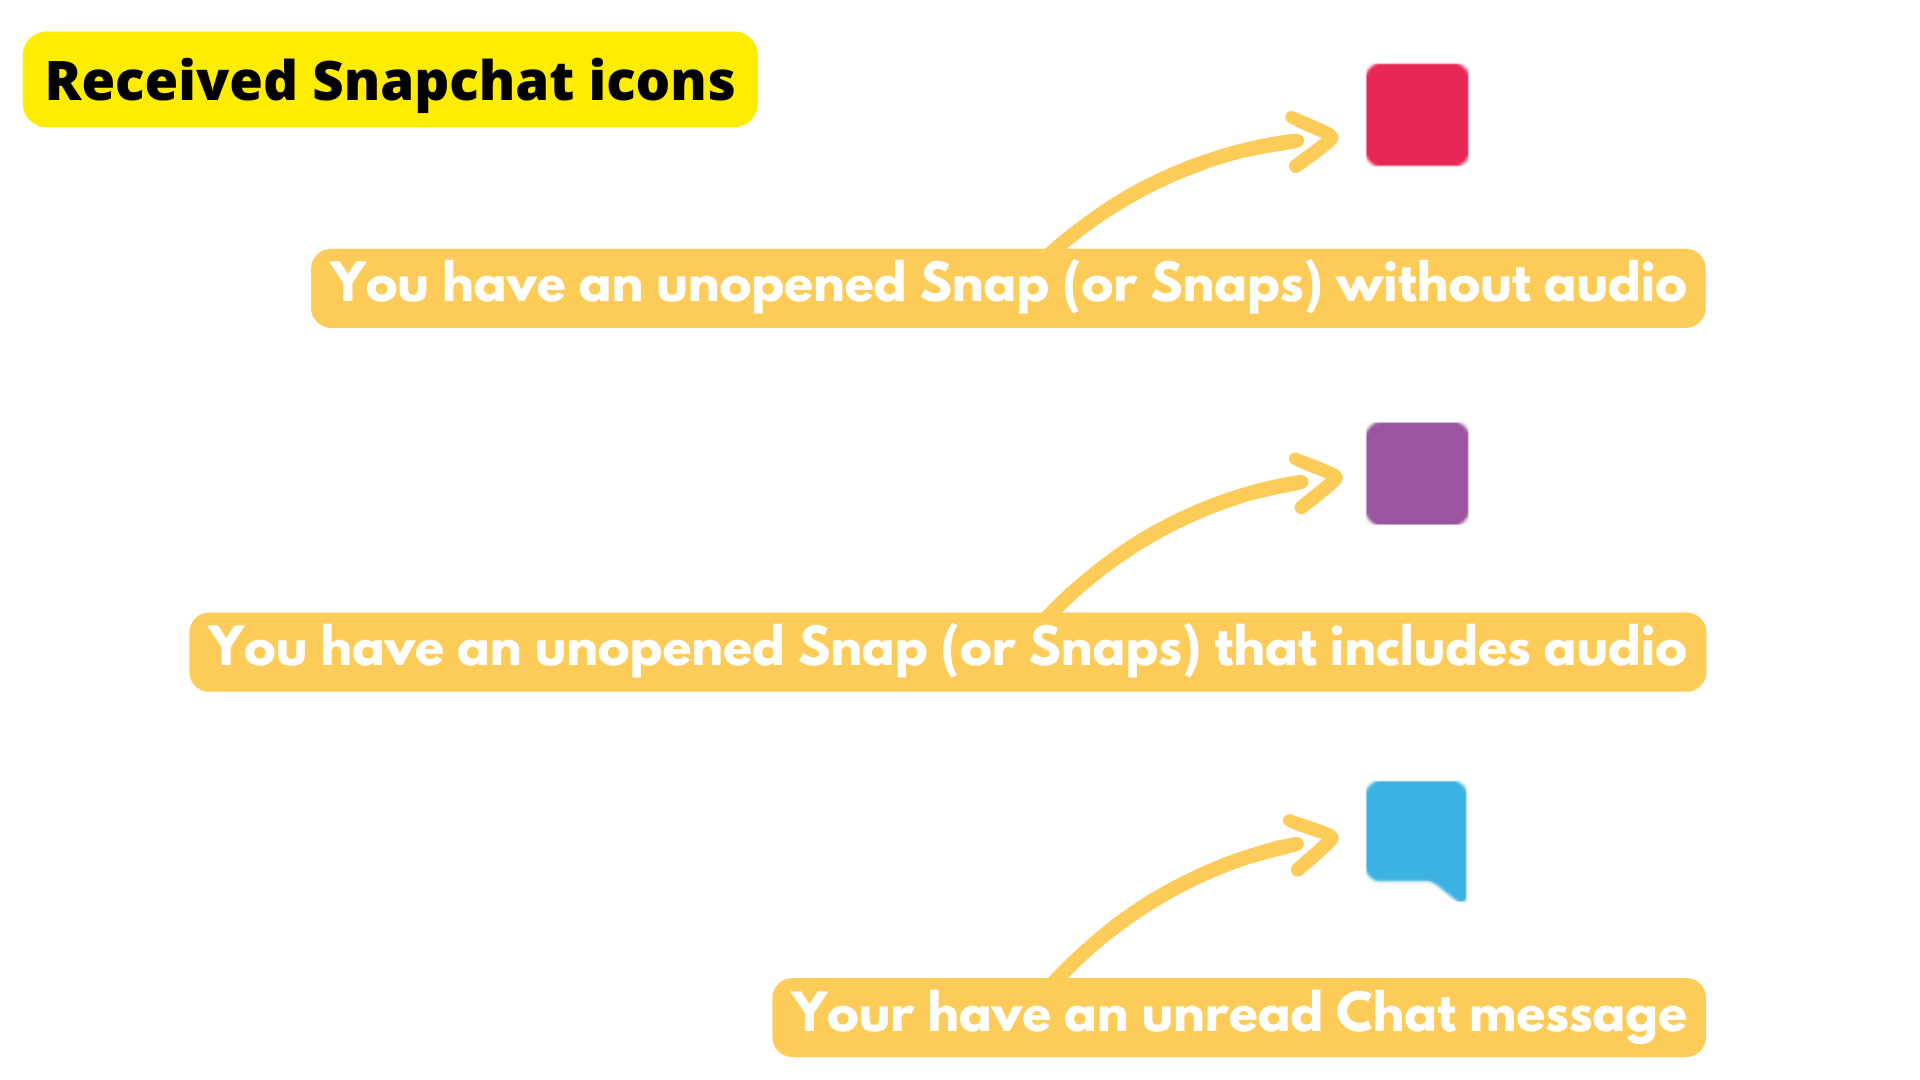 received snapchat icons meaning